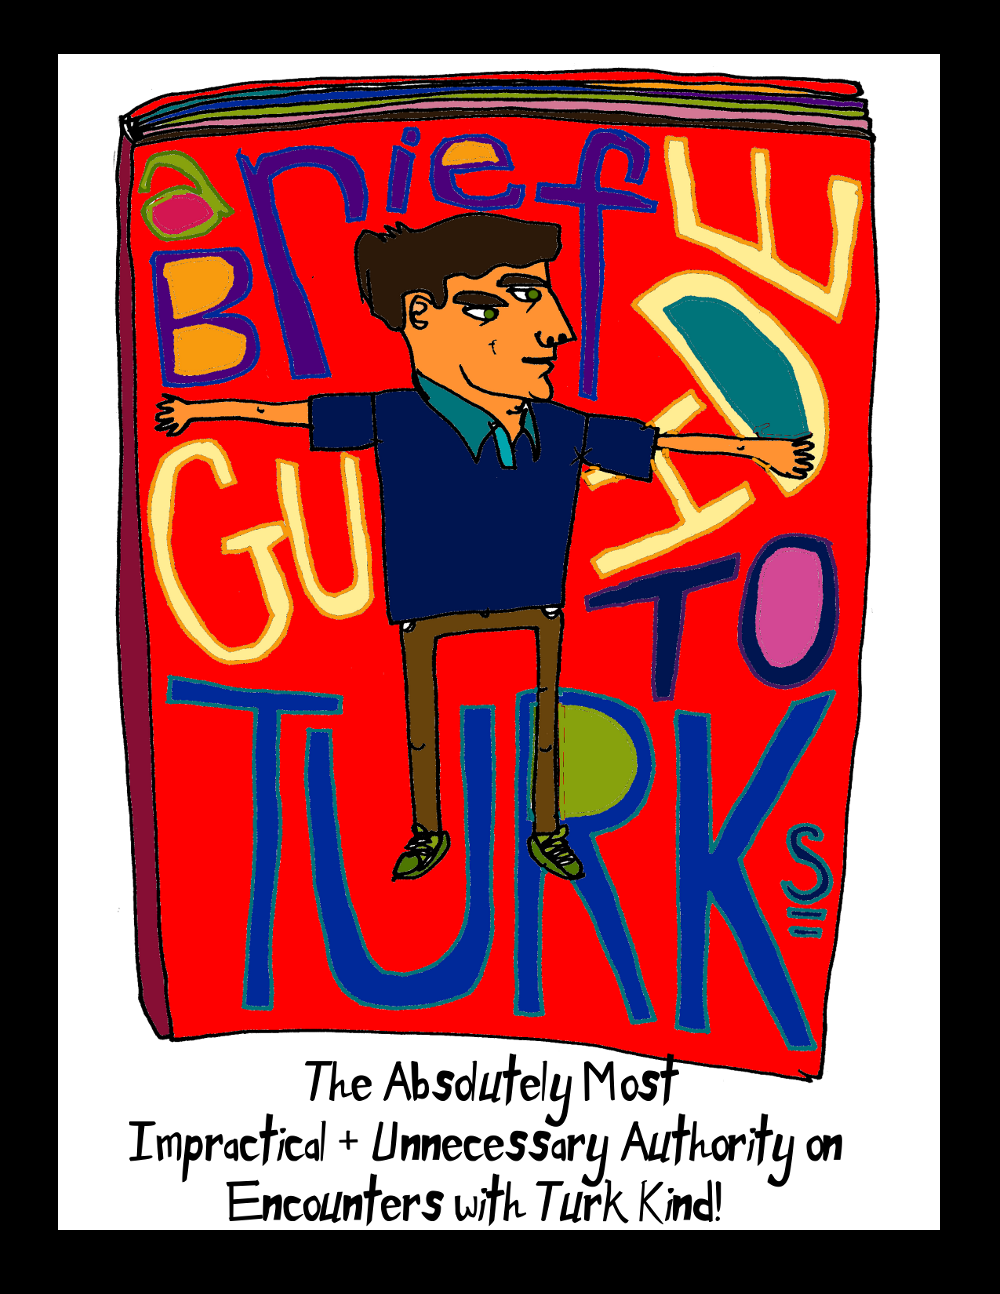 Turks - 00 - a brief guid to turks the cover 2 - 1000